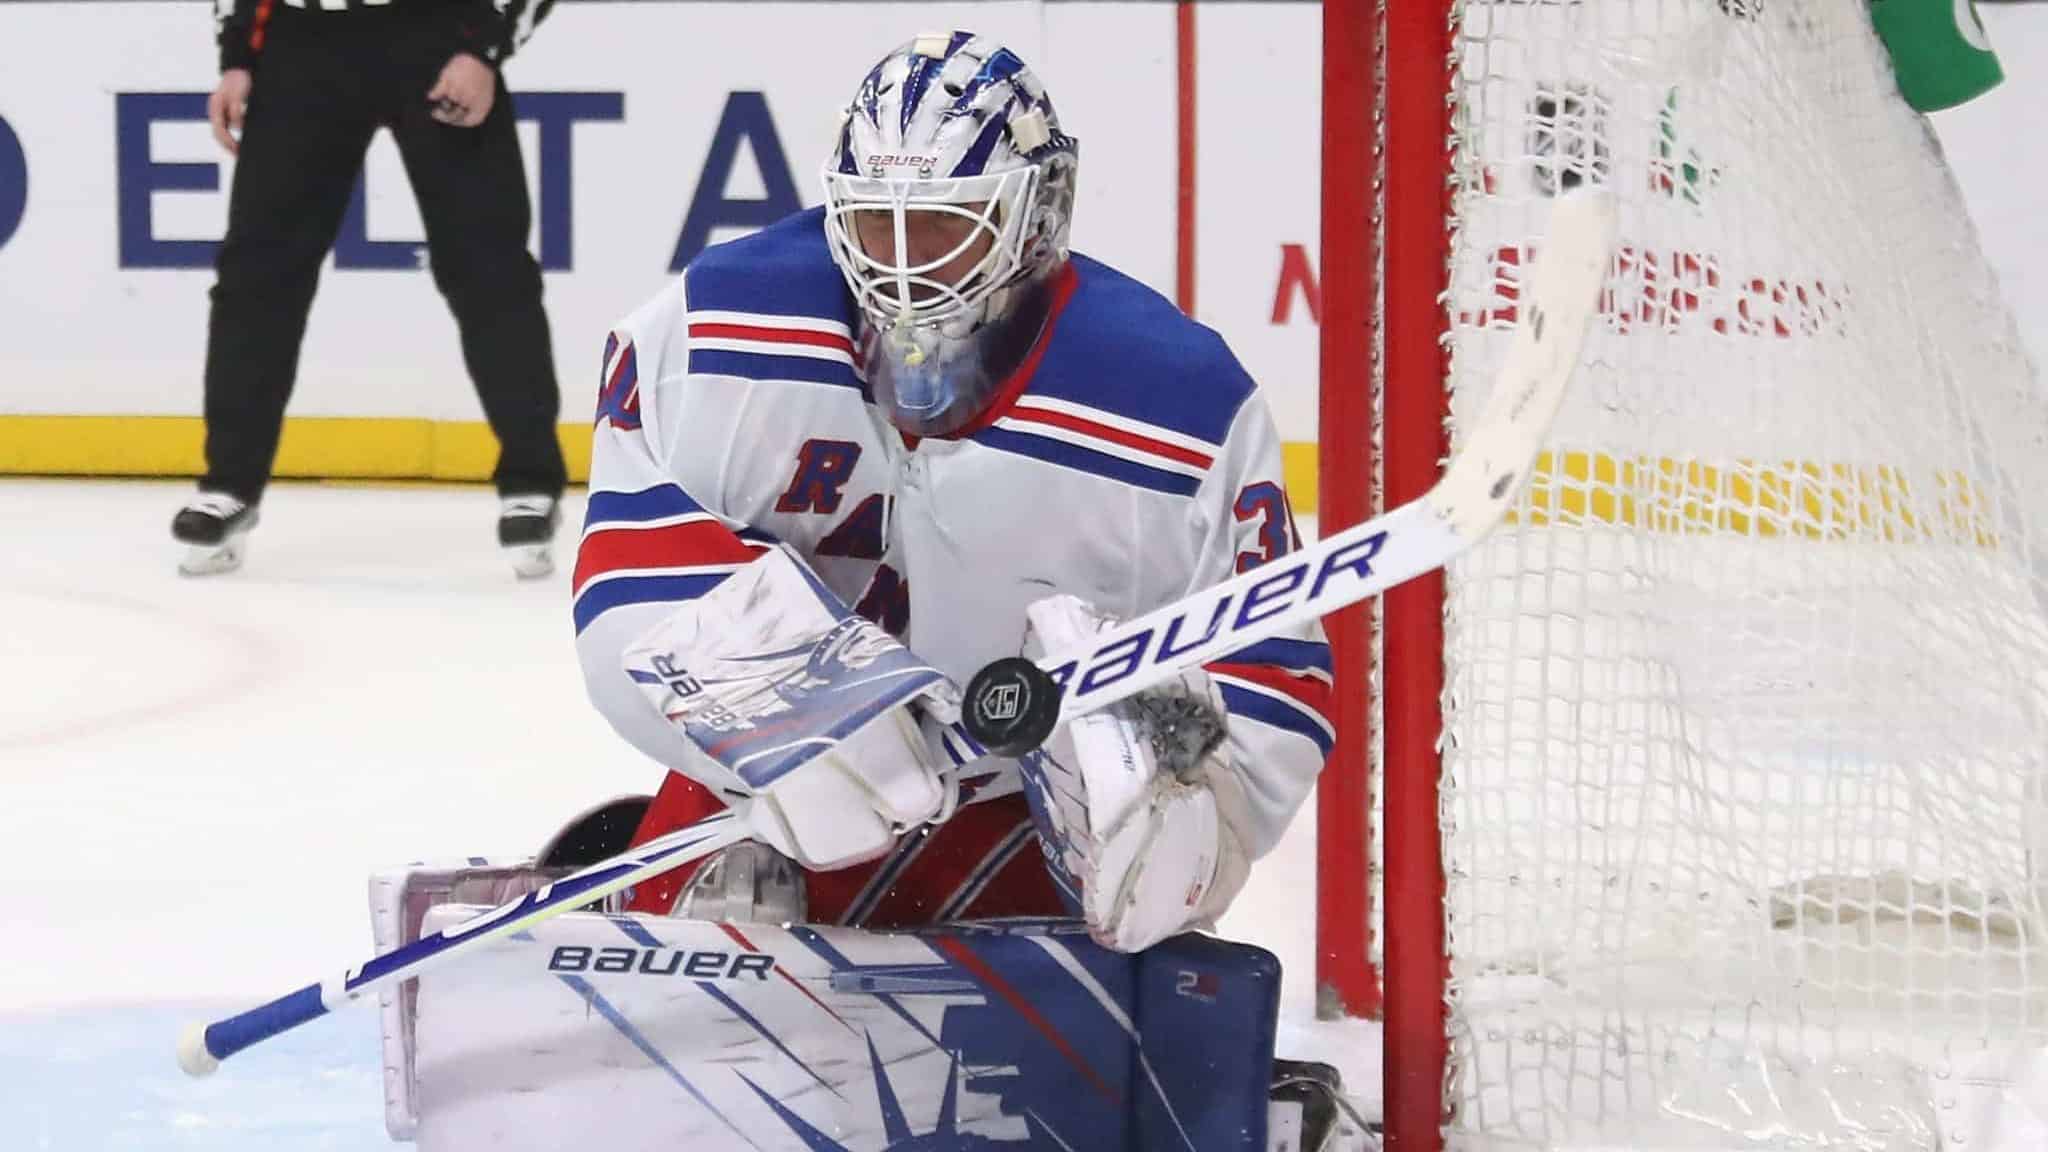 LOS ANGELES, CALIFORNIA - DECEMBER 10: Henrik Lundqvist #30 of the New York Rangers sticks aside a 2po shot against the Los Angeles Kings at the Staples Center on December 10, 2019 in Los Angeles, California.